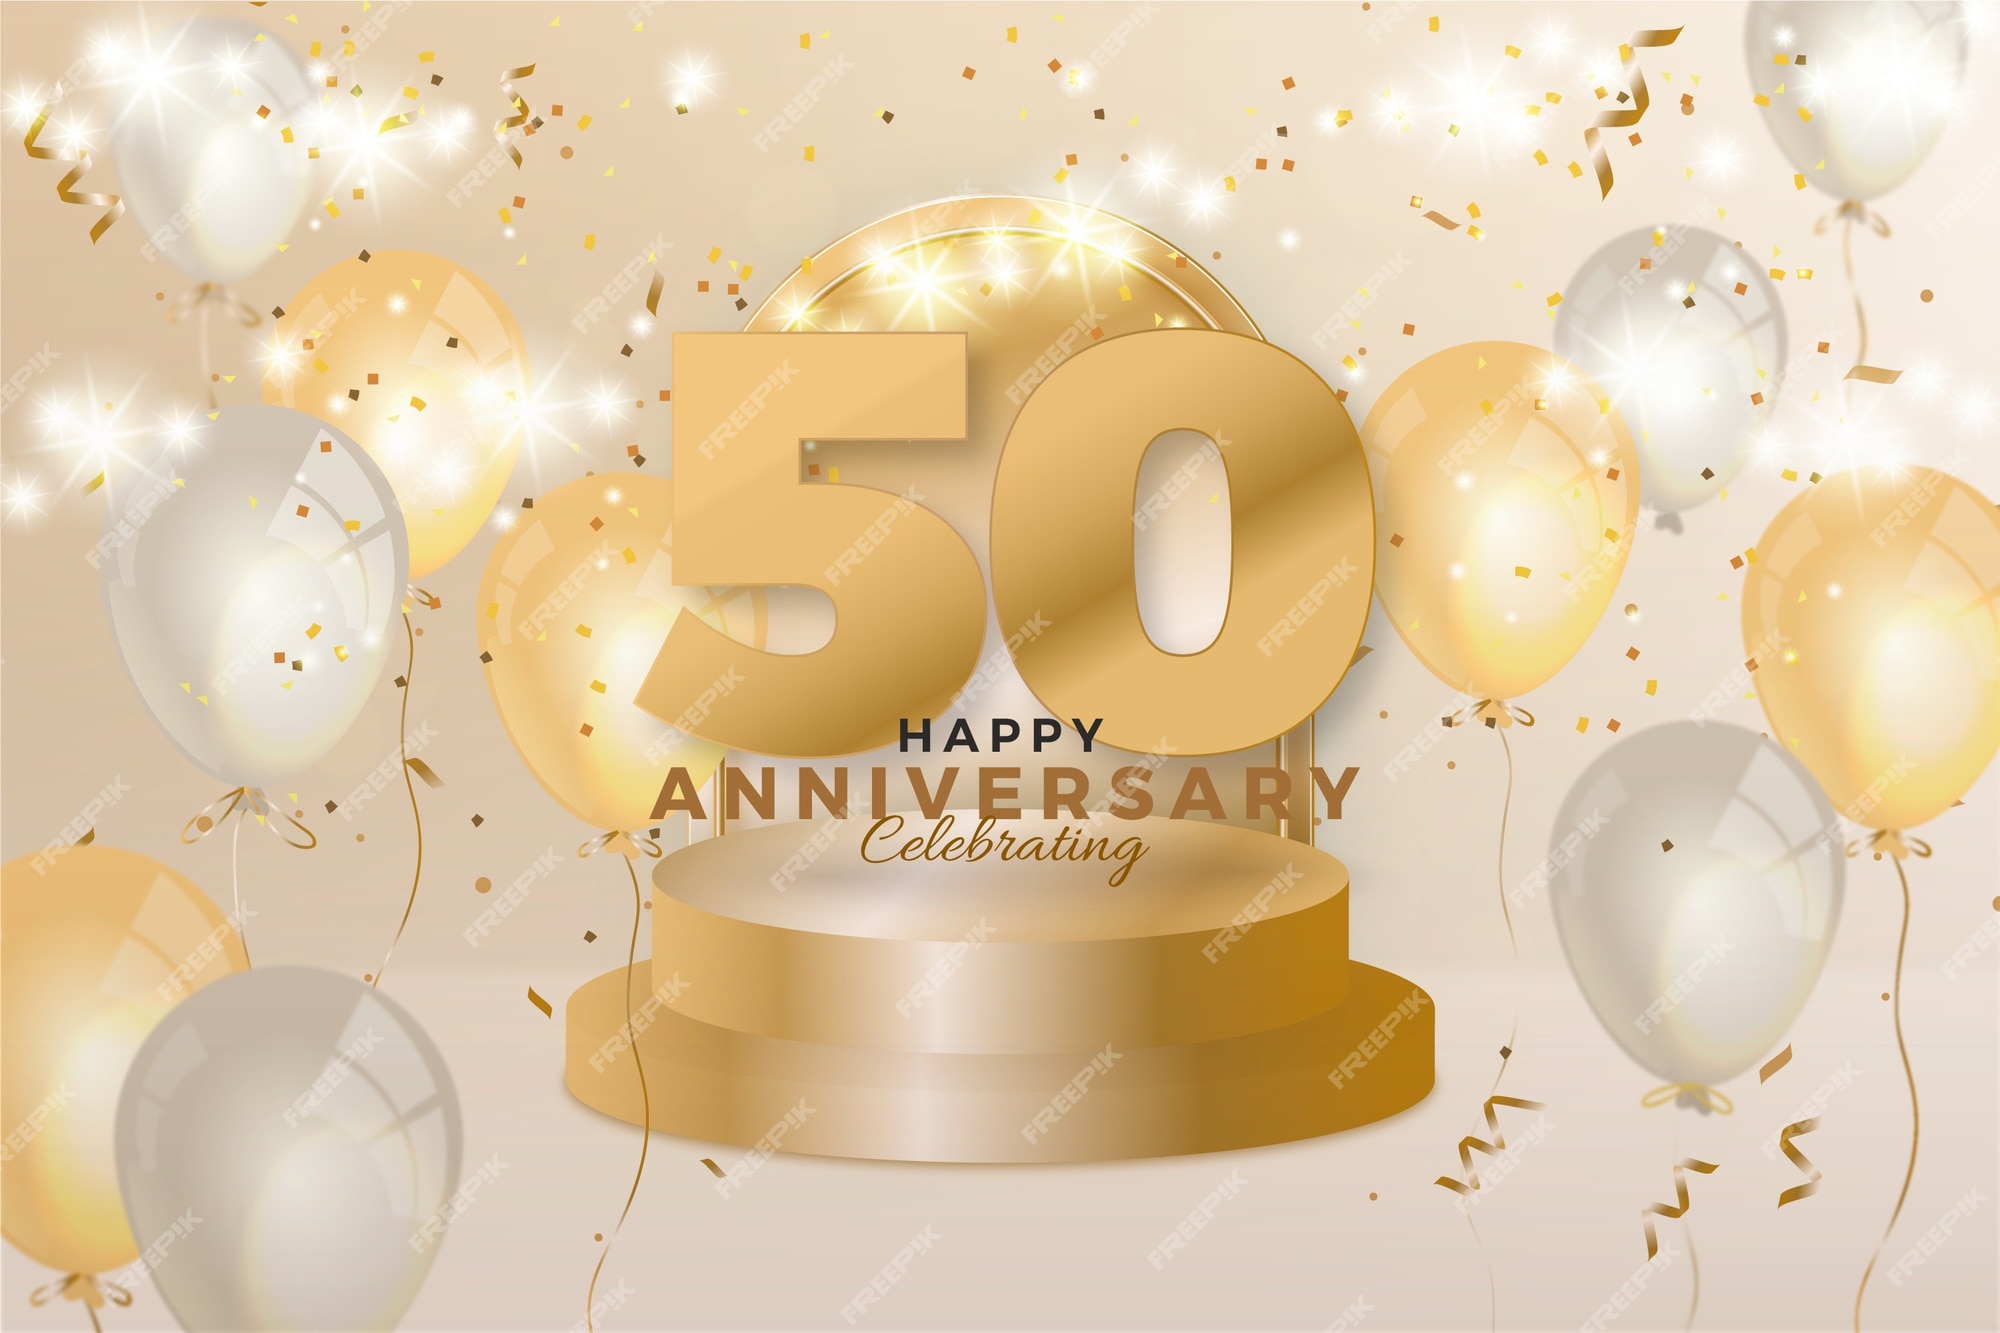 Add Some Fun to Your Virtual Party with a Happy 50th Birthday Teams Background - Get Your Download N